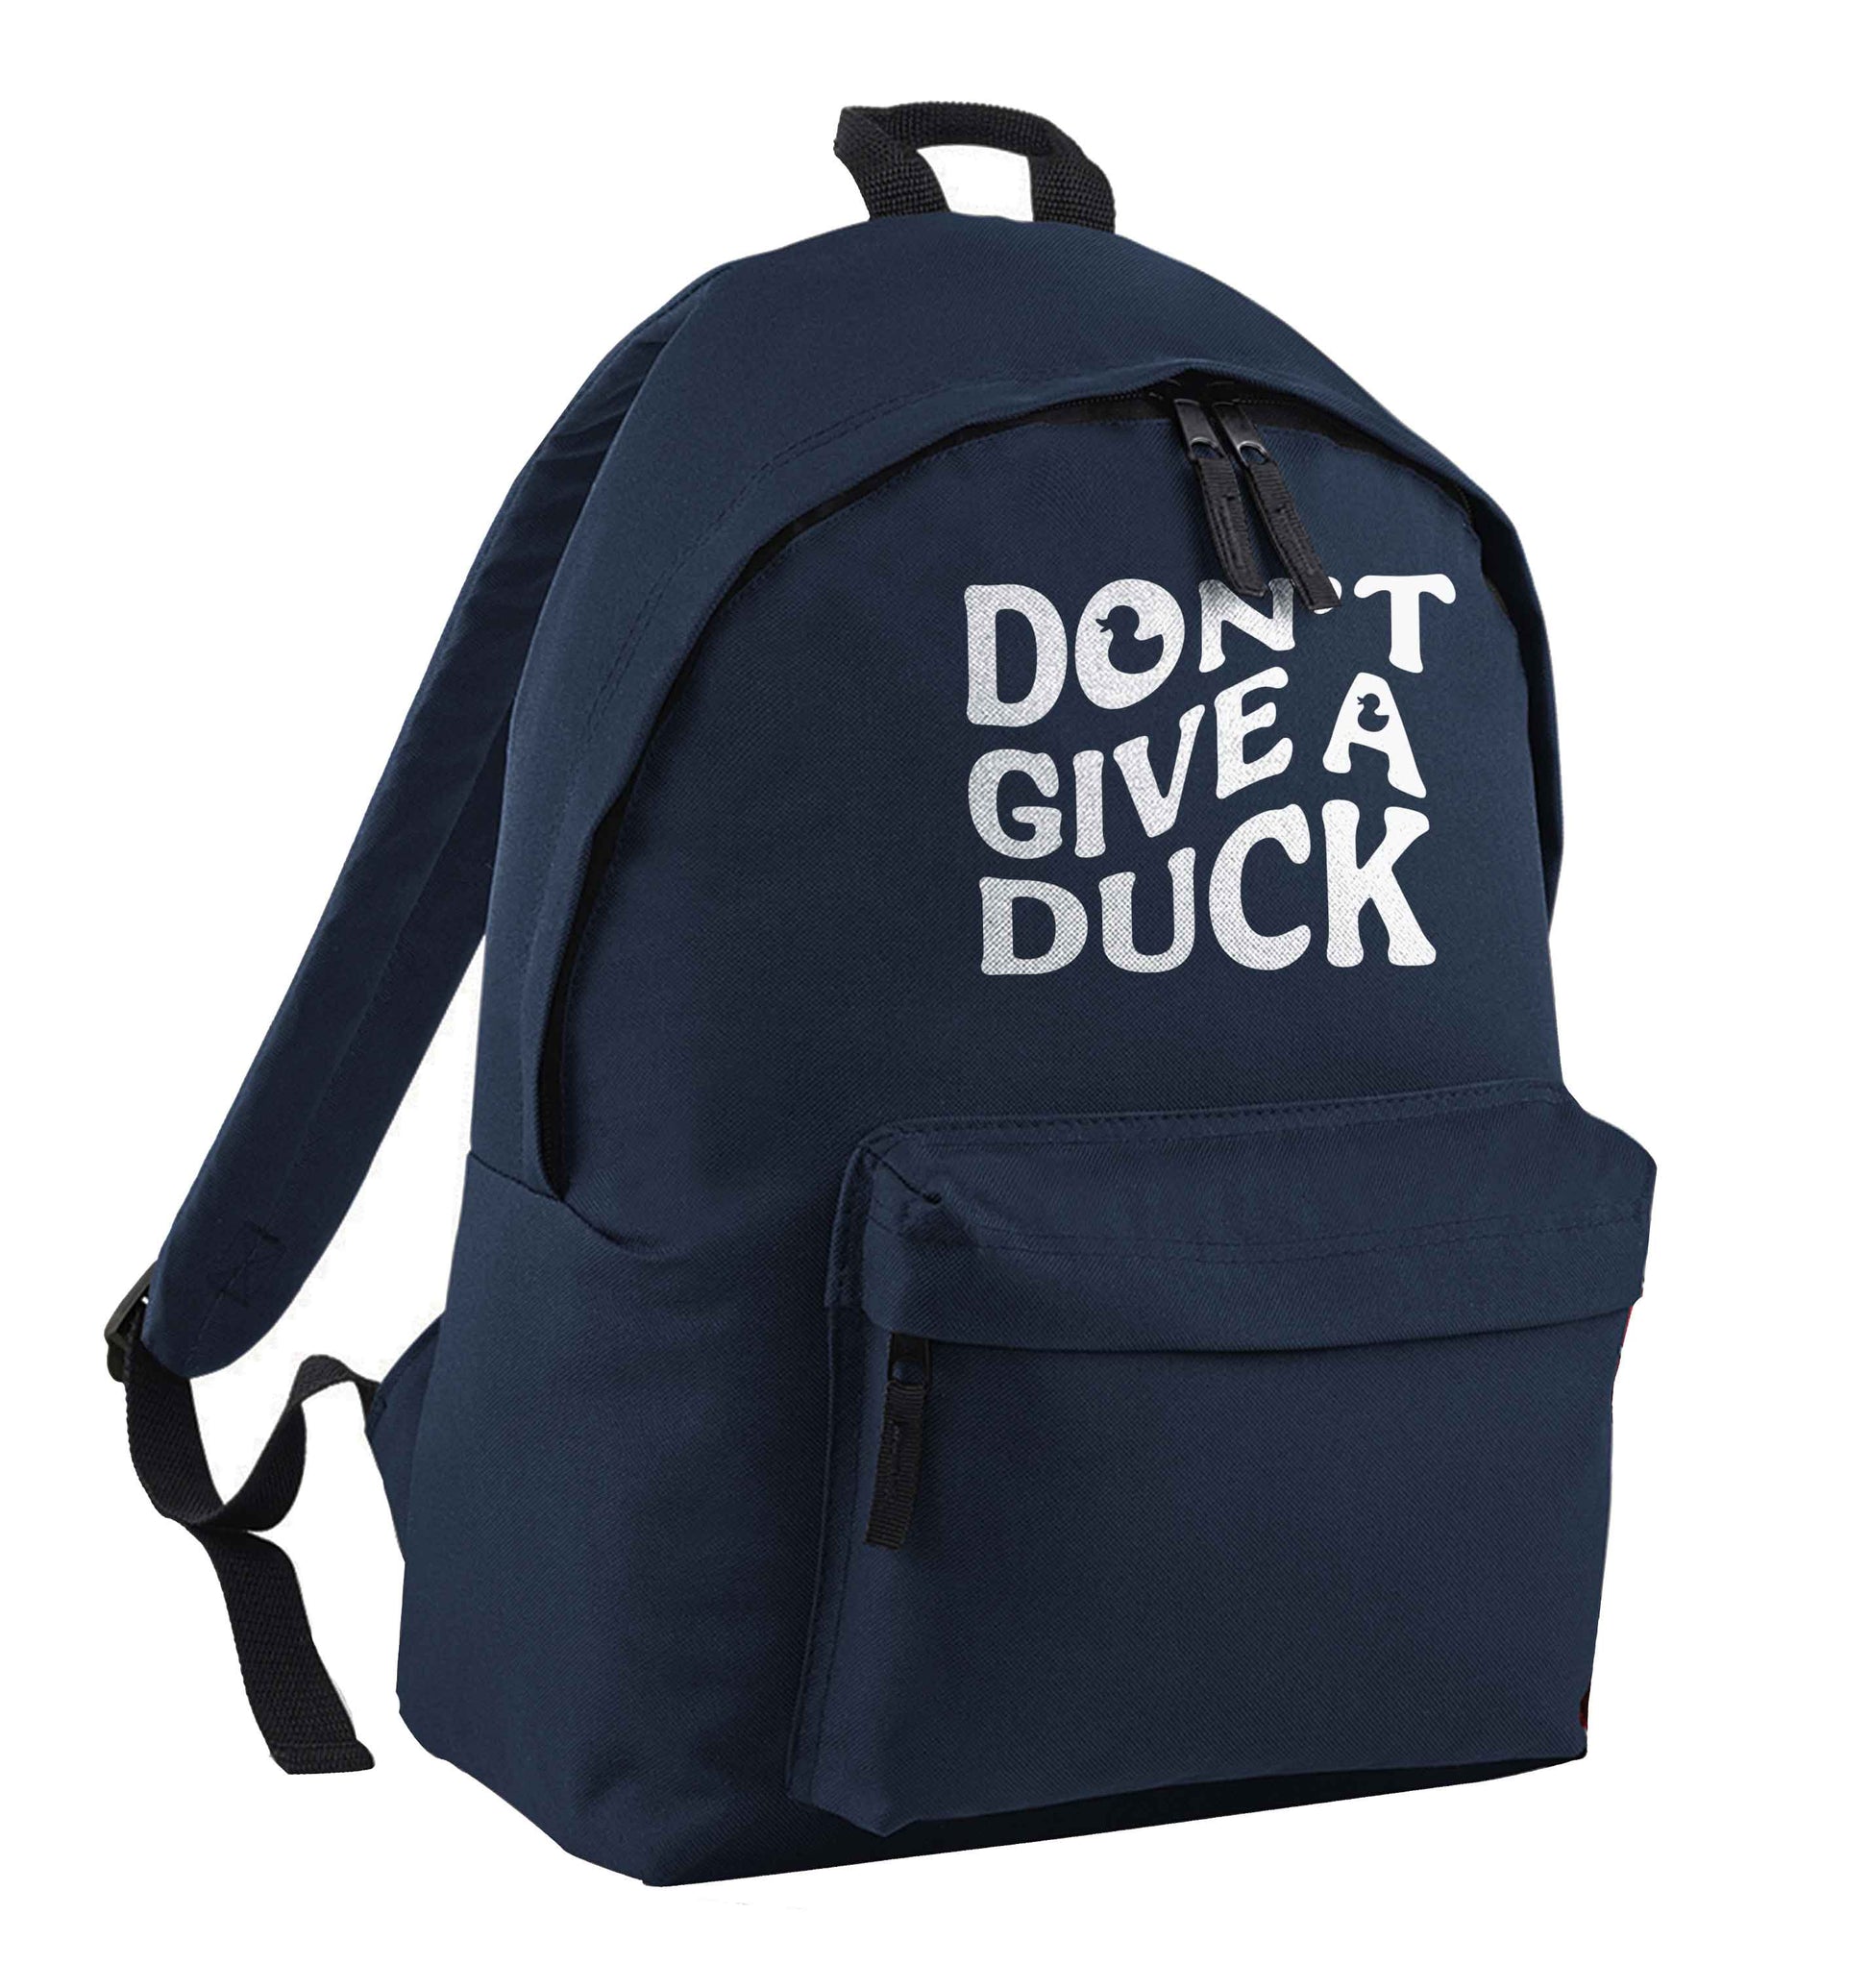 Don't give a duck navy adults backpack